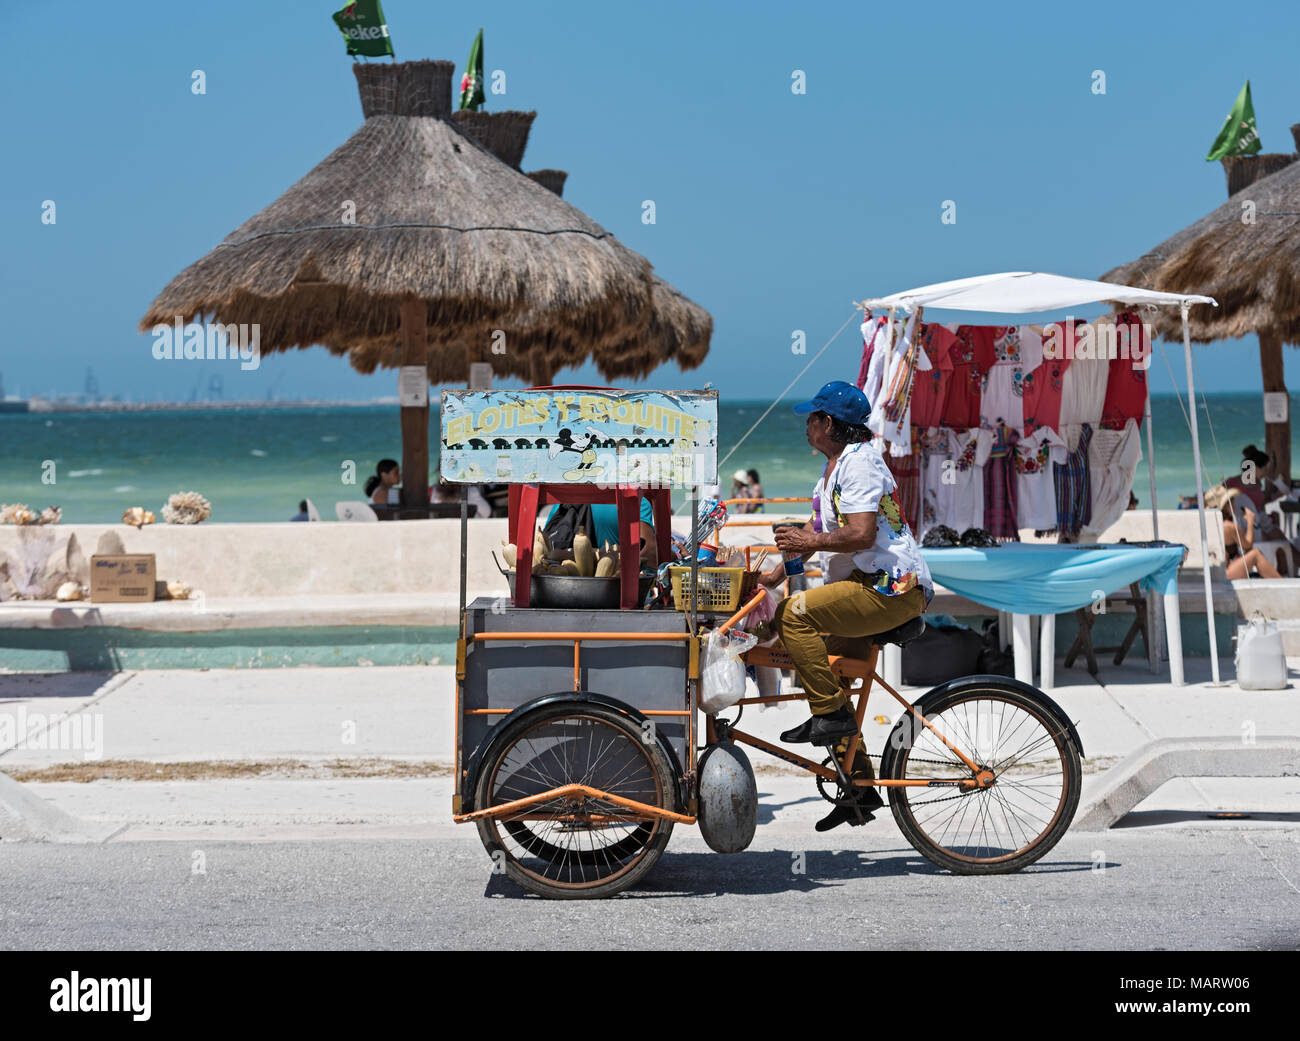 Fruit seller on a yellow tricycle on the quay street of Progreso, Yucatan, Mexico Stock Photo